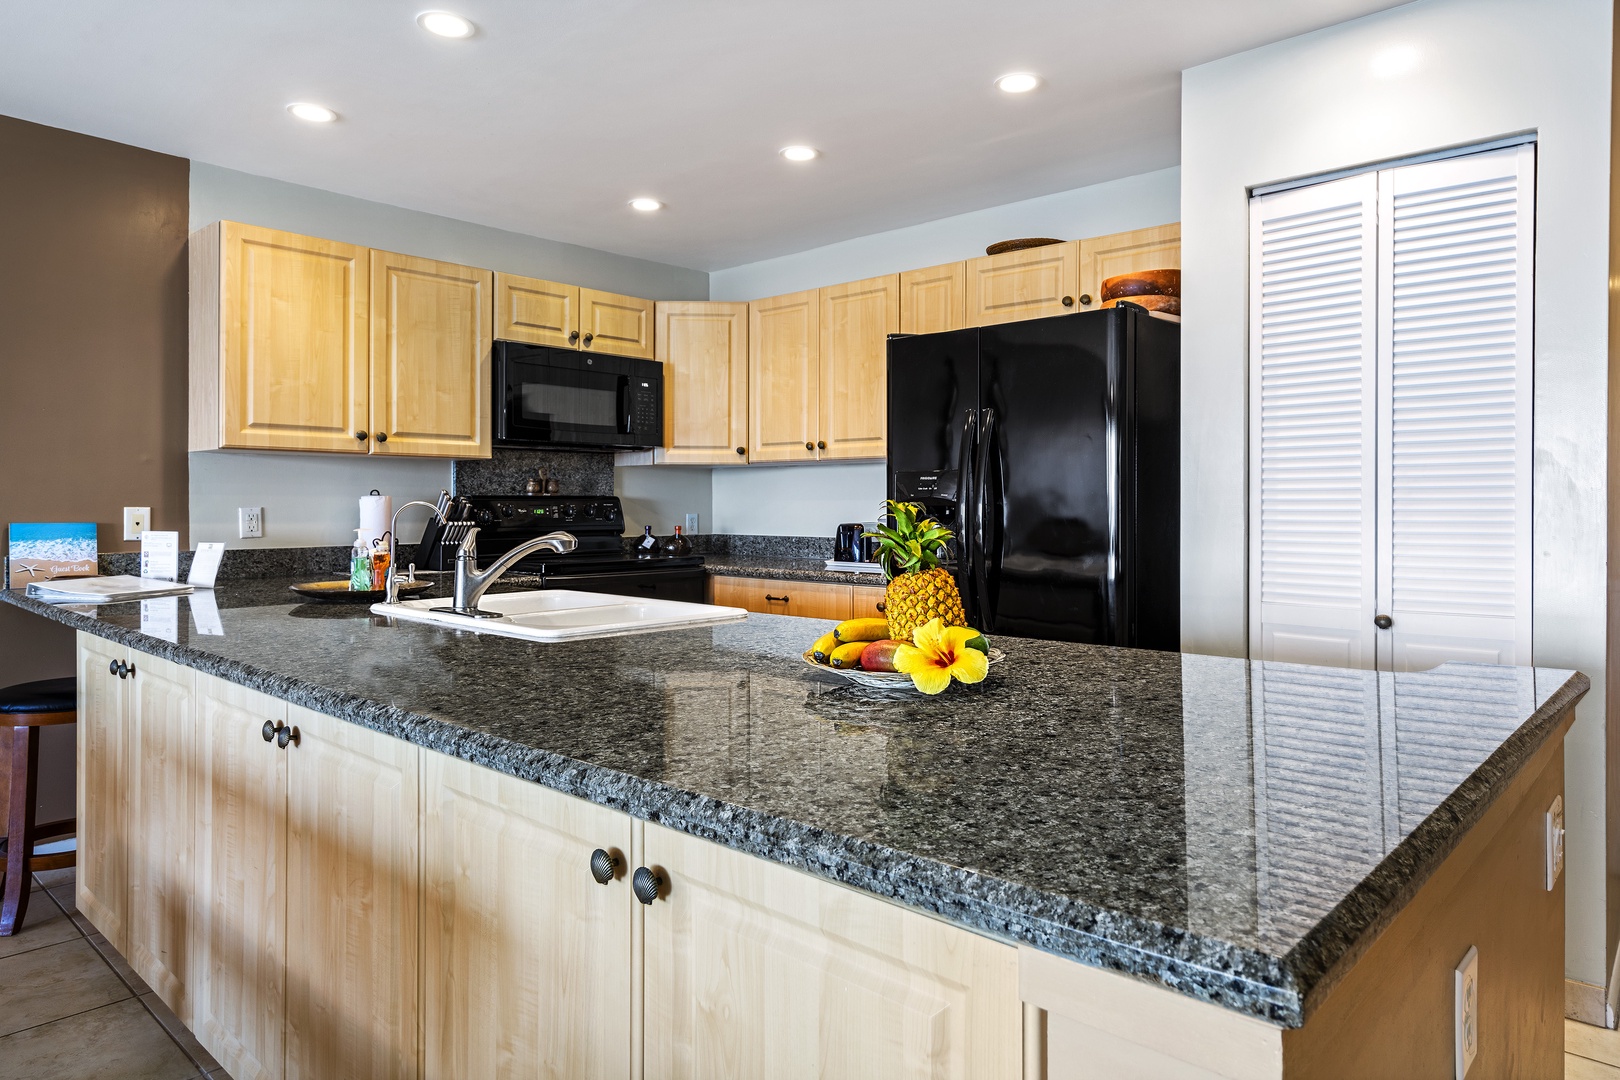 Kailua Kona Vacation Rentals, Sea Village 1105 - Fully equipped kitchen with breakfast bar